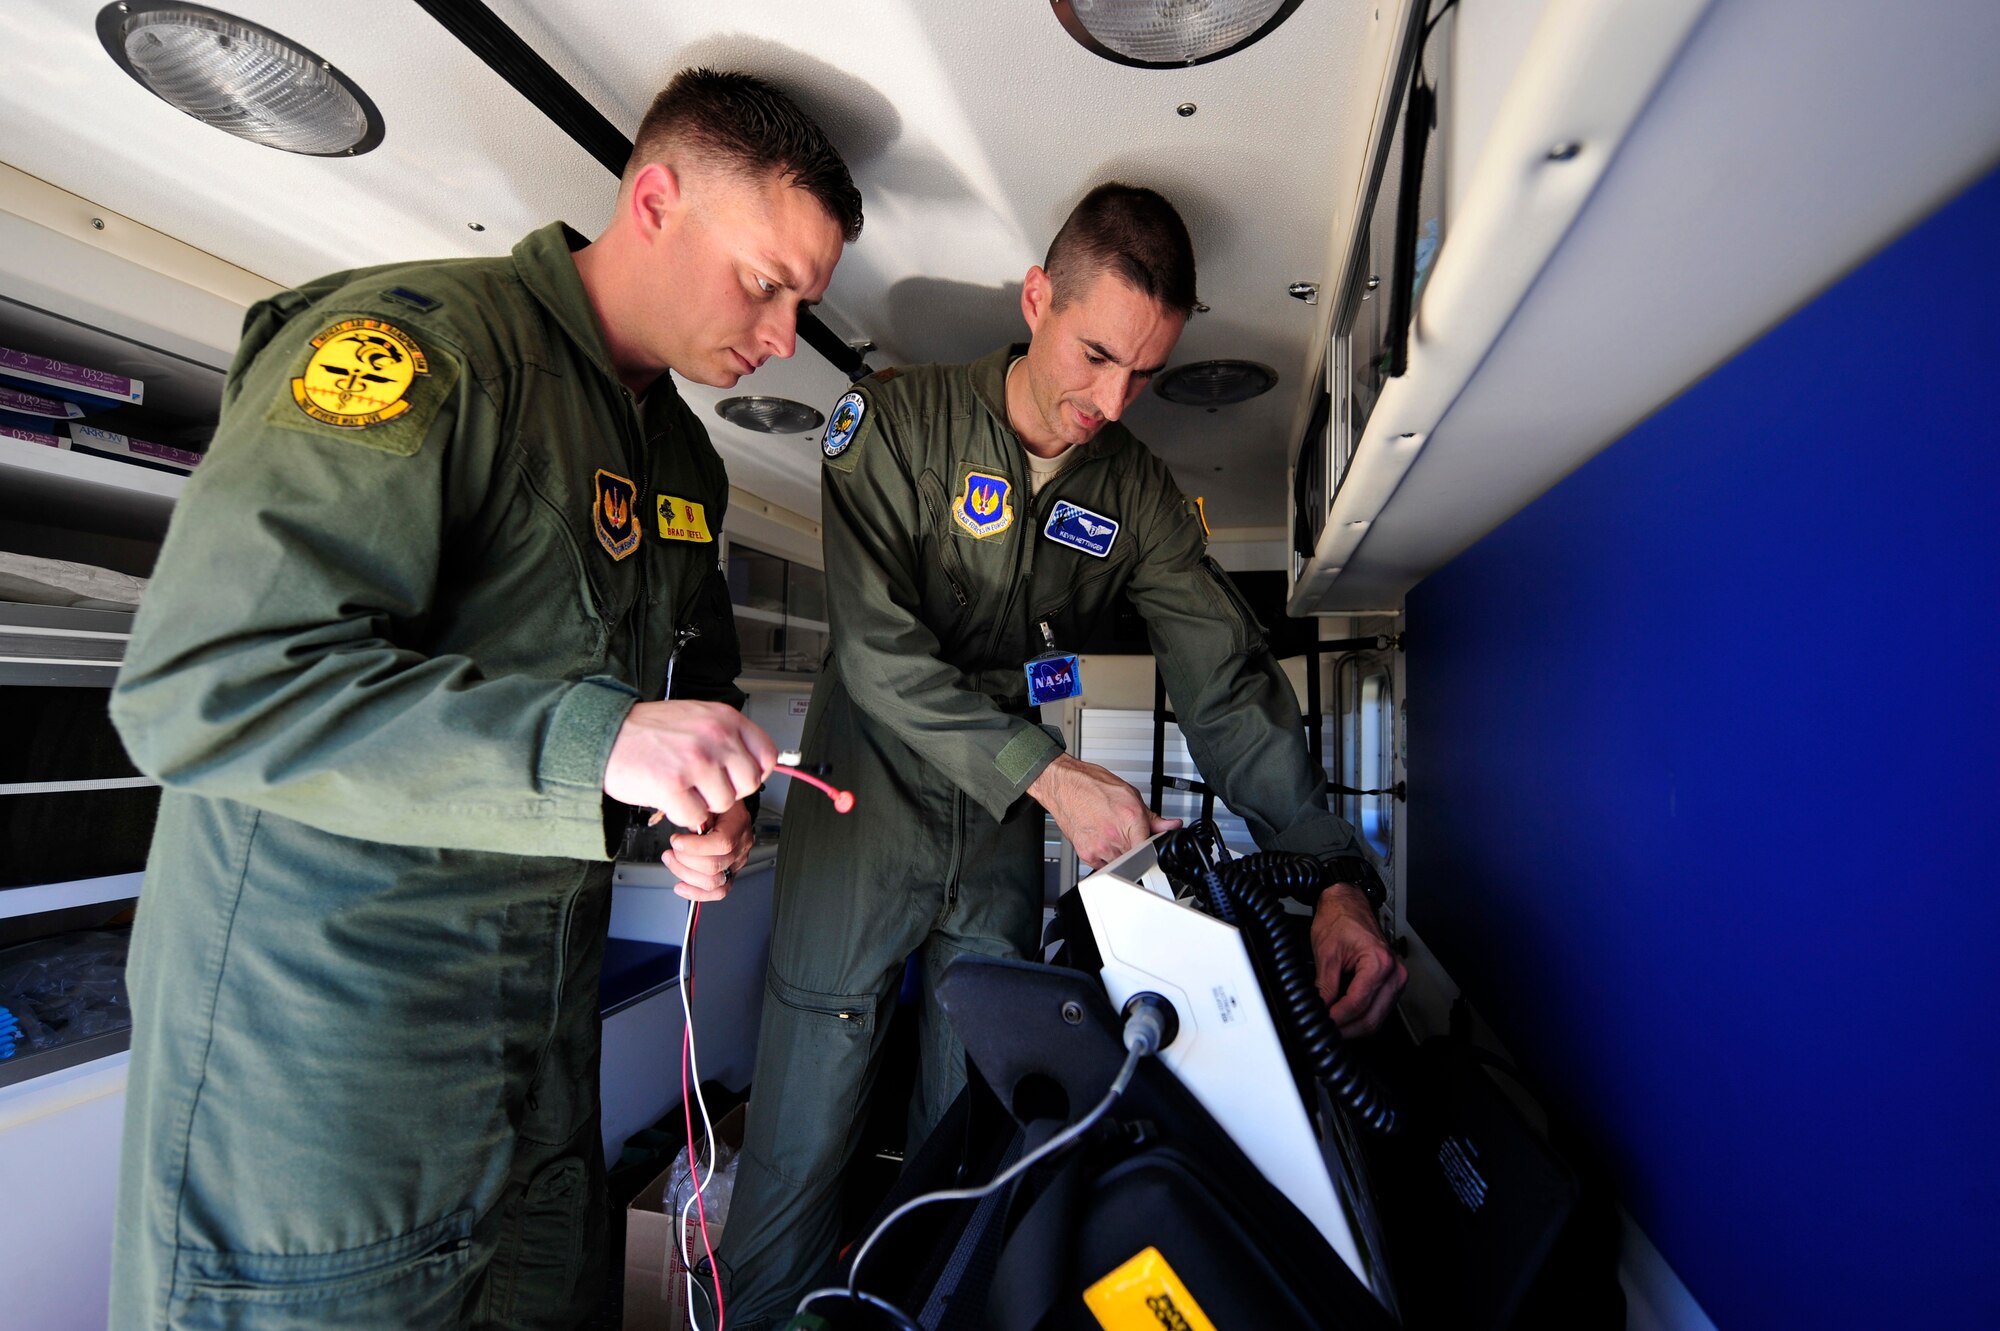 (l-r) U.S. Air Force 1st Lt. Bradley Tiefel, 86th Medical Squadron critical care nurse and Maj. Kevin Hettinger, 435th Contingency Response Group physician, perform ops checks on their medical equipment prior to the space shuttle launch, July 8, 2011, Zaragoza Air Base, Spain.  As space shuttle Atlantis makes it's final launch into orbit, personnel from DoD, NASA, and the Spanish Air Force work together to prepare for a possible emergency landing at the Transoceanic Abort Landing Site, Zaragoza Air Base, Spain. This particular TAL is one of three primary landing sites within U.S. Air Forces Europe, and this is the 135th mission the U.S. military has supported. (U.S. Air Force photo by Tech. Sgt. Chenzira Mallory)